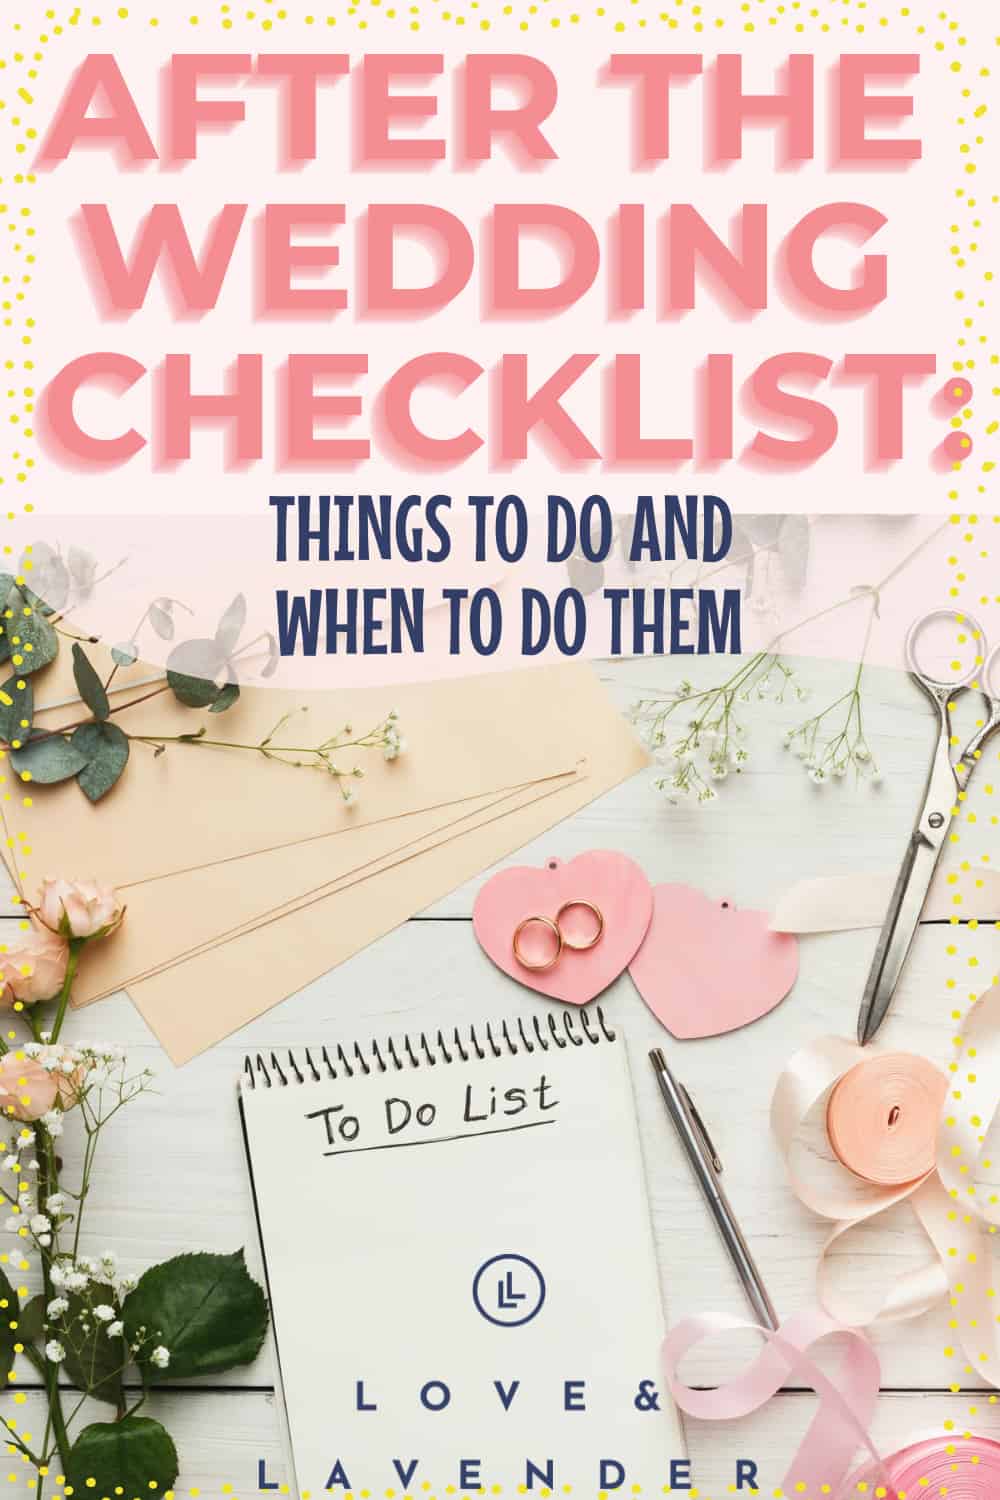 After the Wedding Checklist: 16 Things To Do and When To Do Them